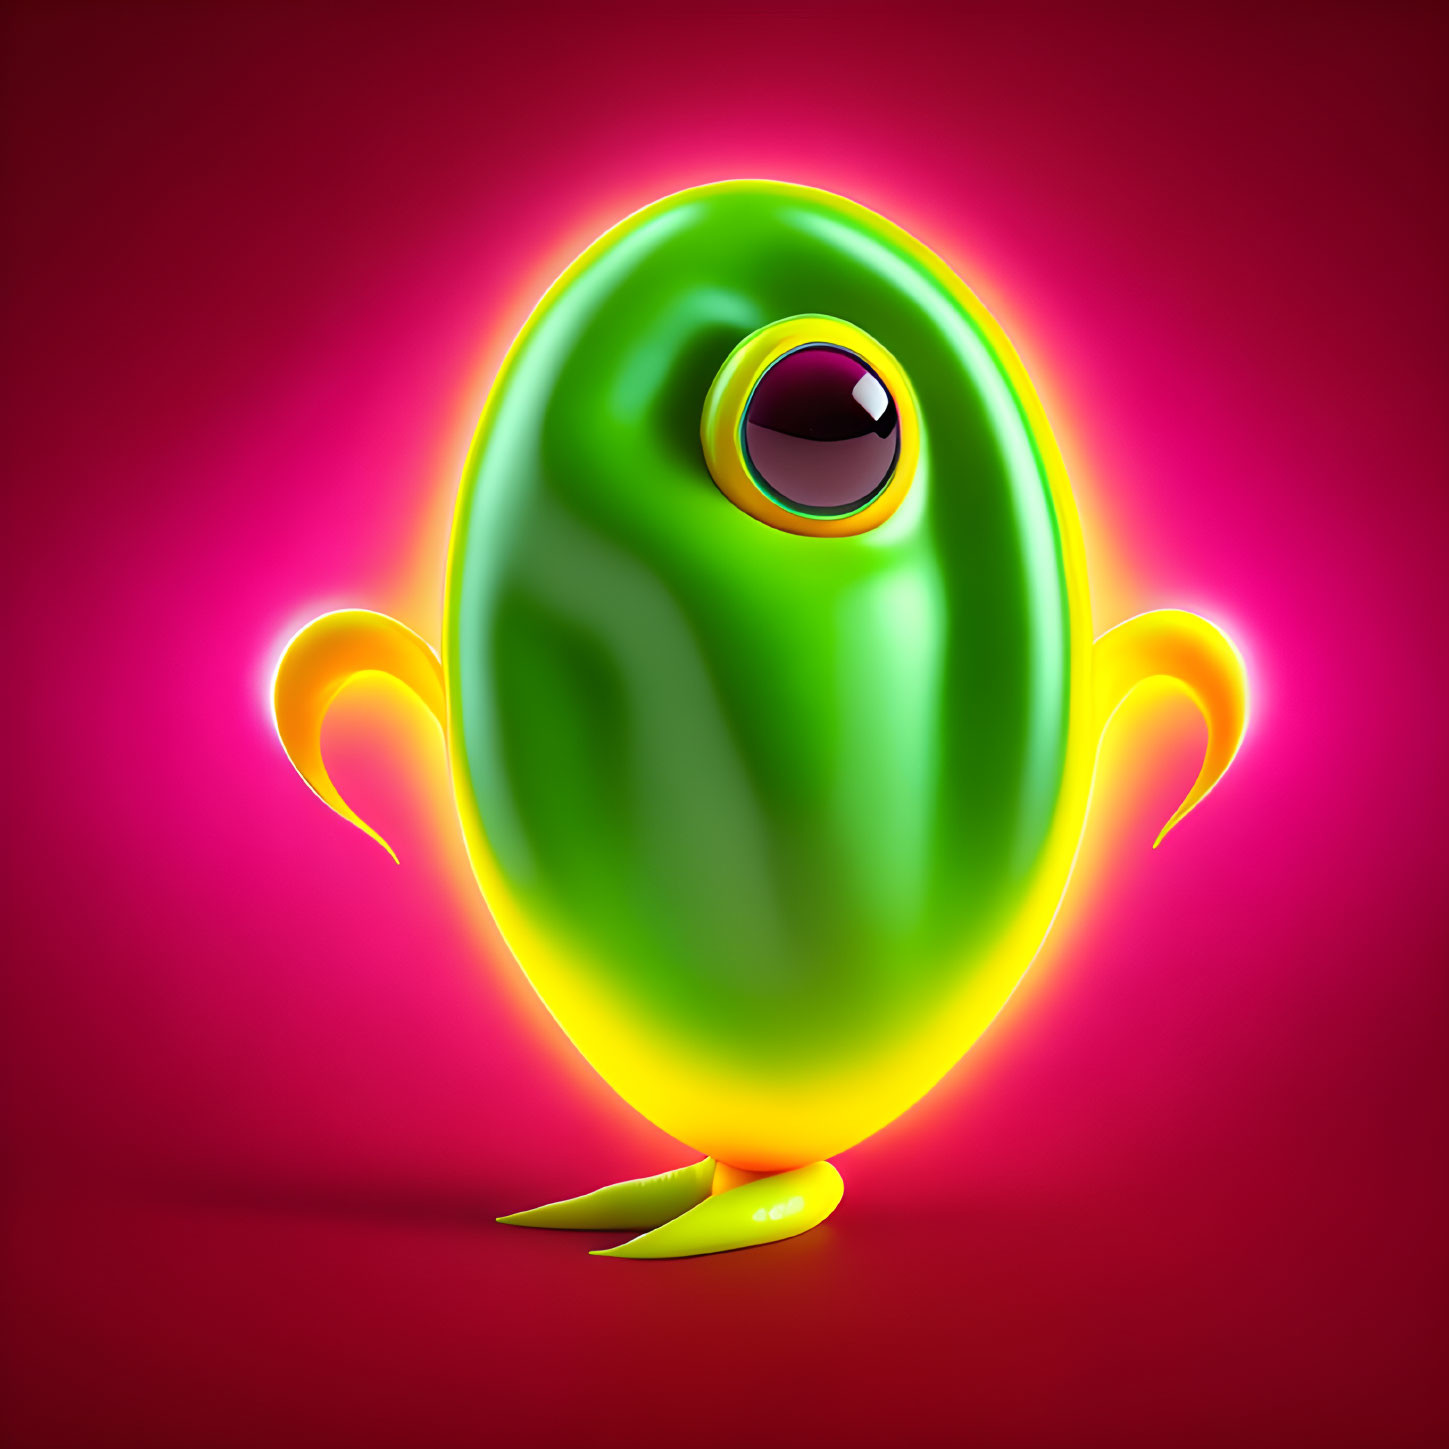 Green one-eyed character with arms and tail on pink background